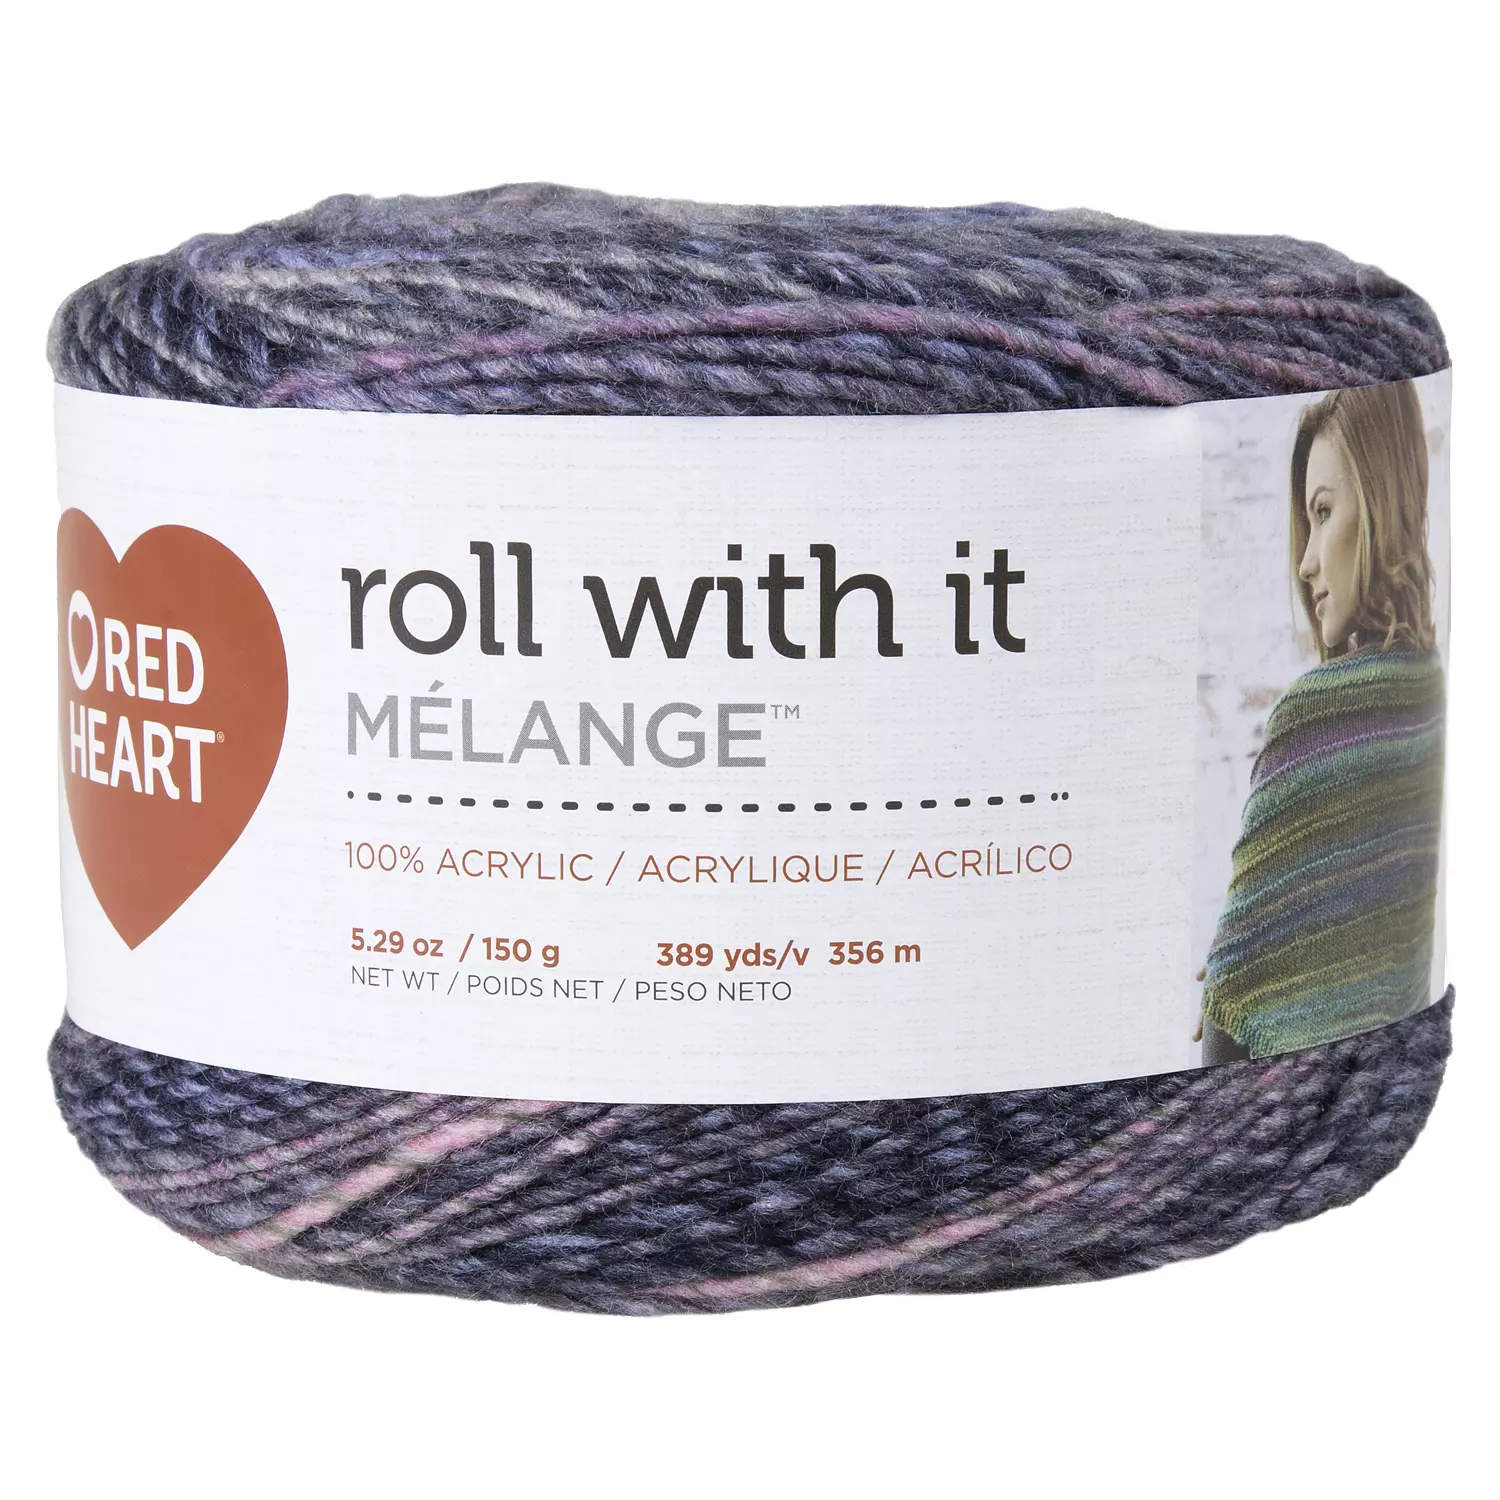 Red Heart Roll With It Mélange - Yarn, tabloid